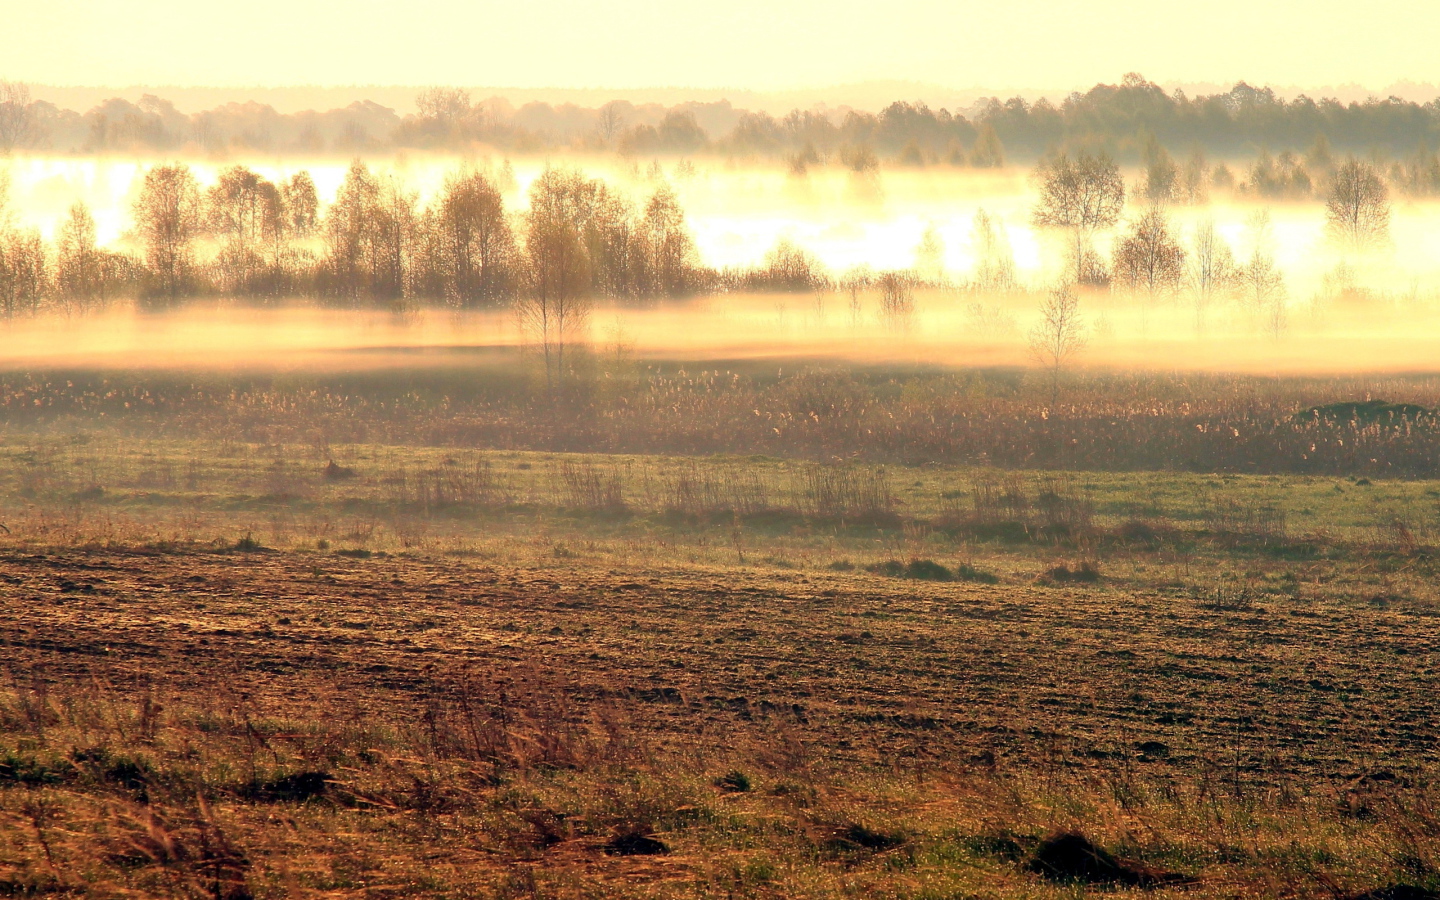 Misty morning in the spring field